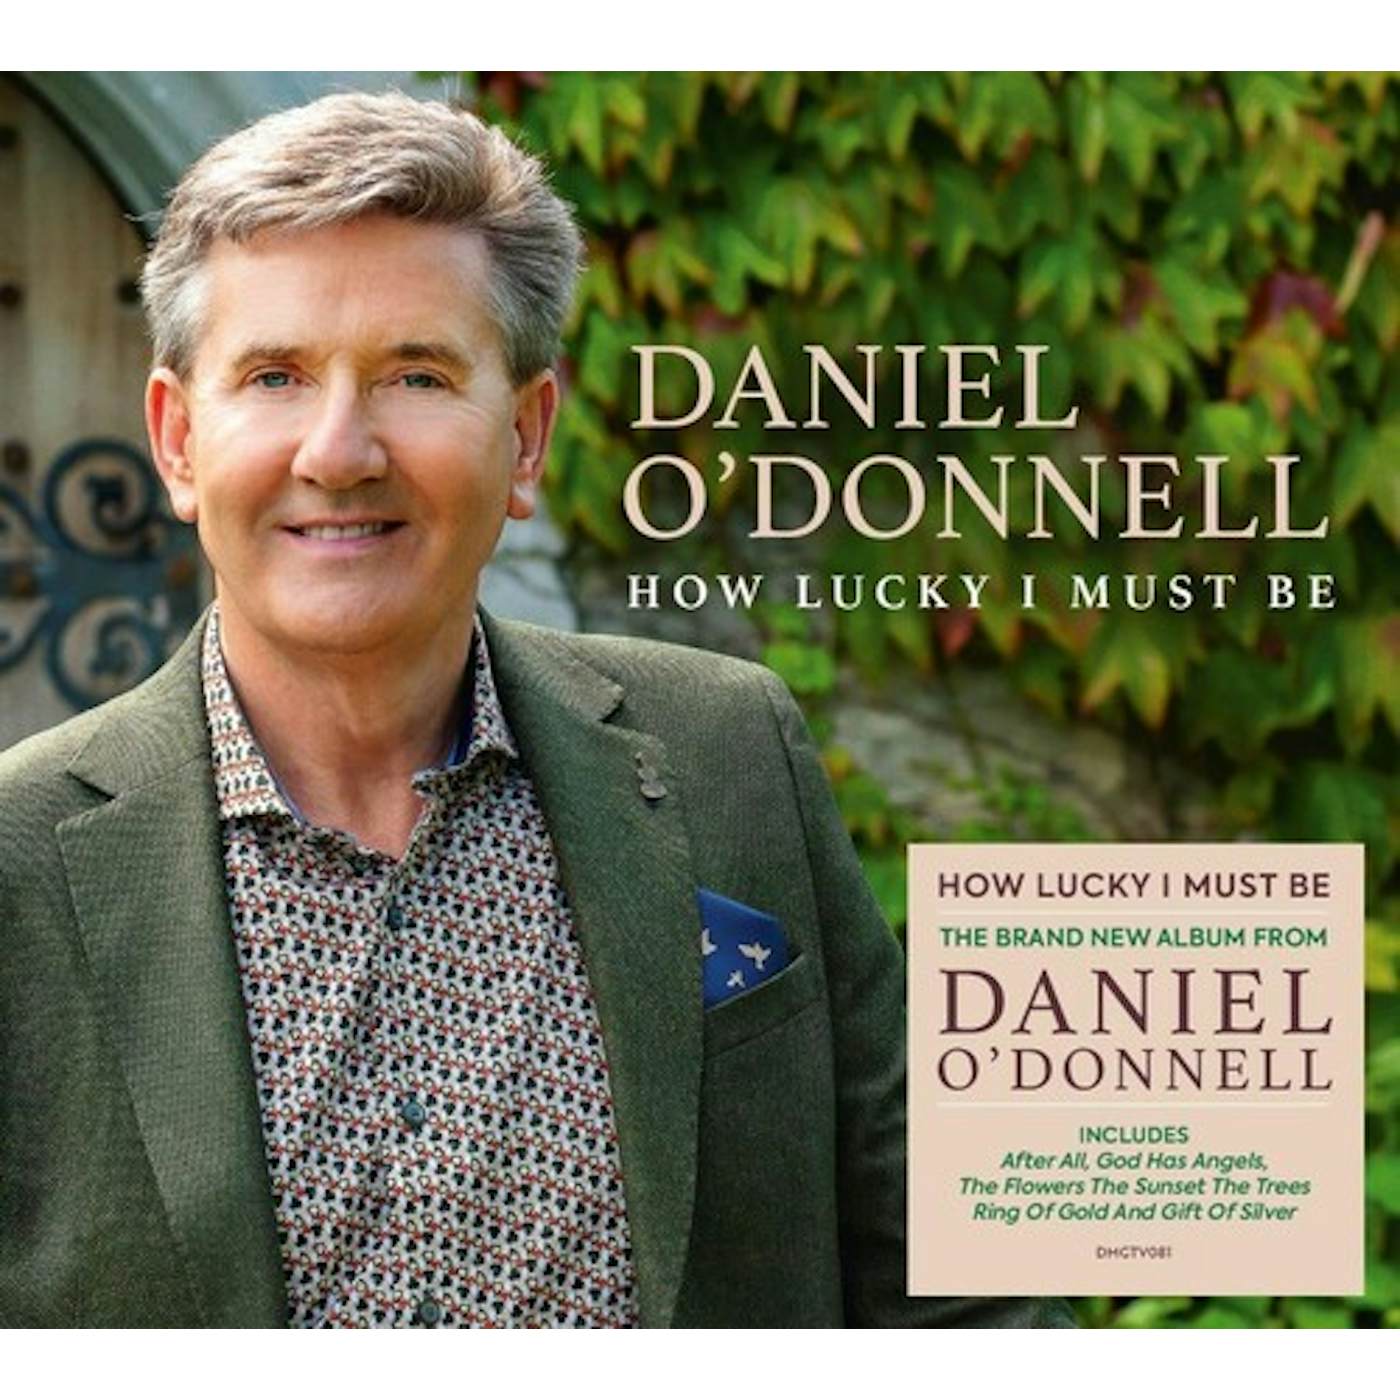 Daniel O'Donnell HOW LUCKY I MUST BE CD